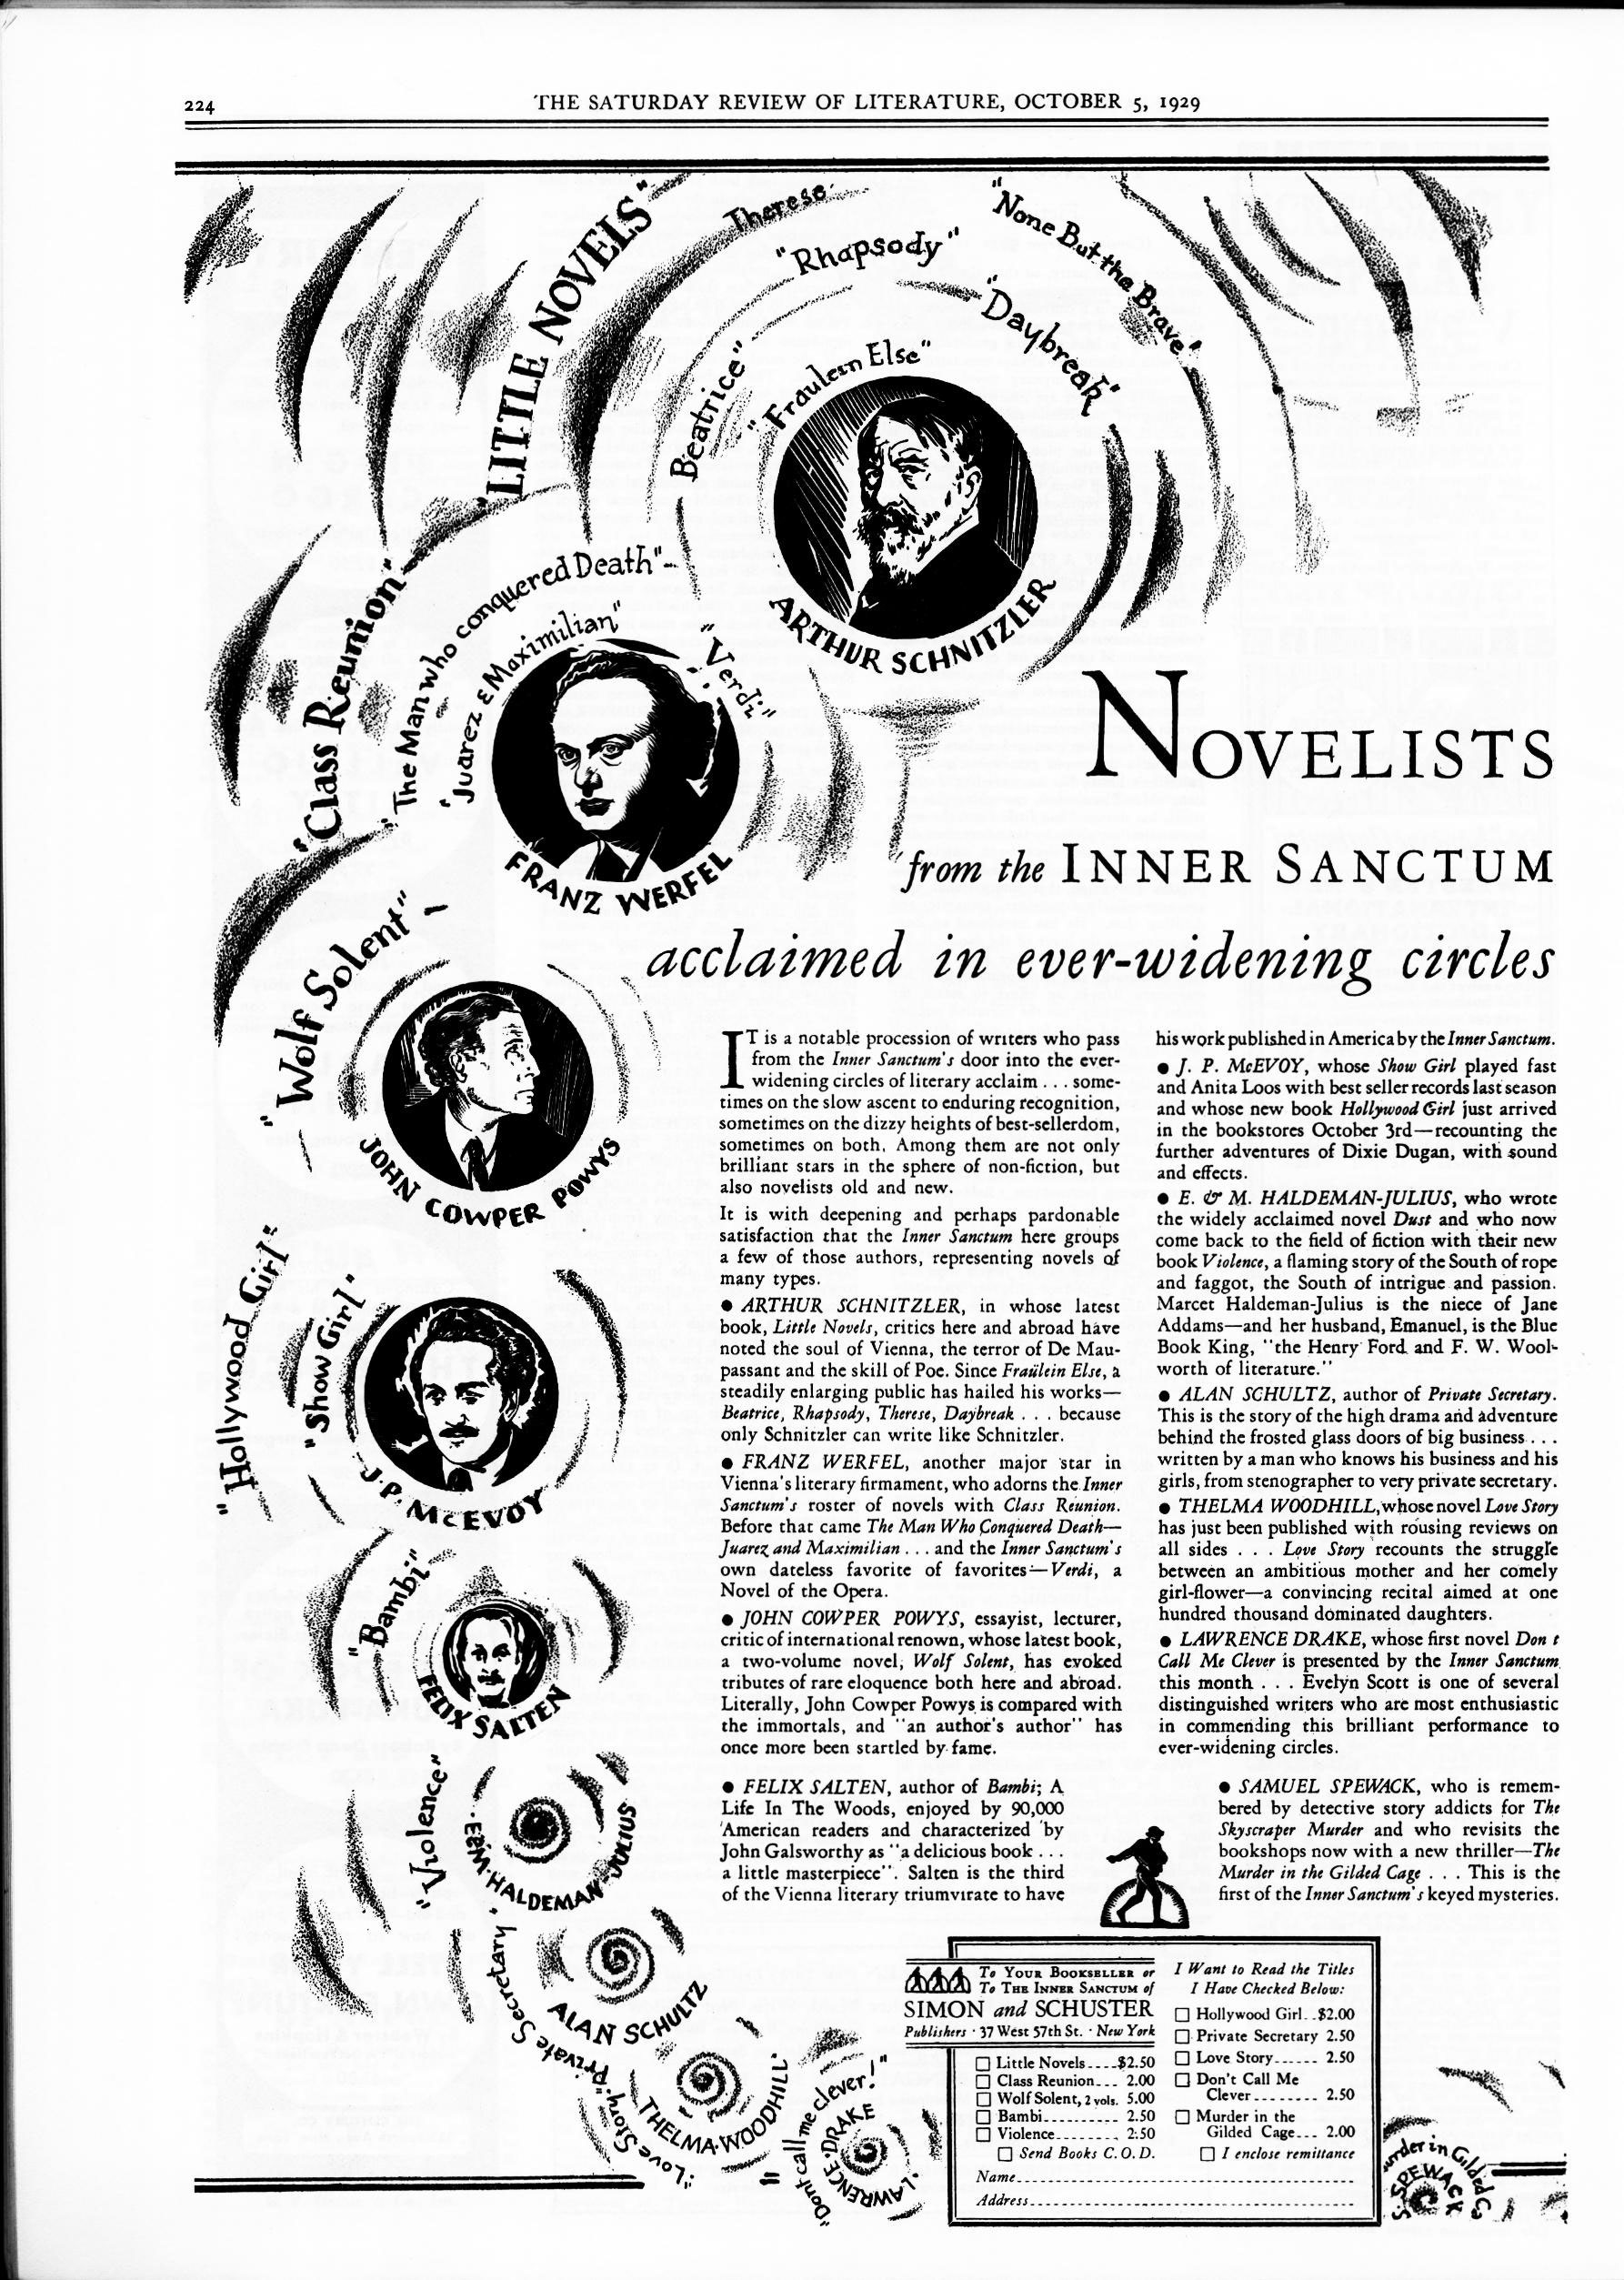 Novelists from the Inner Sanctum